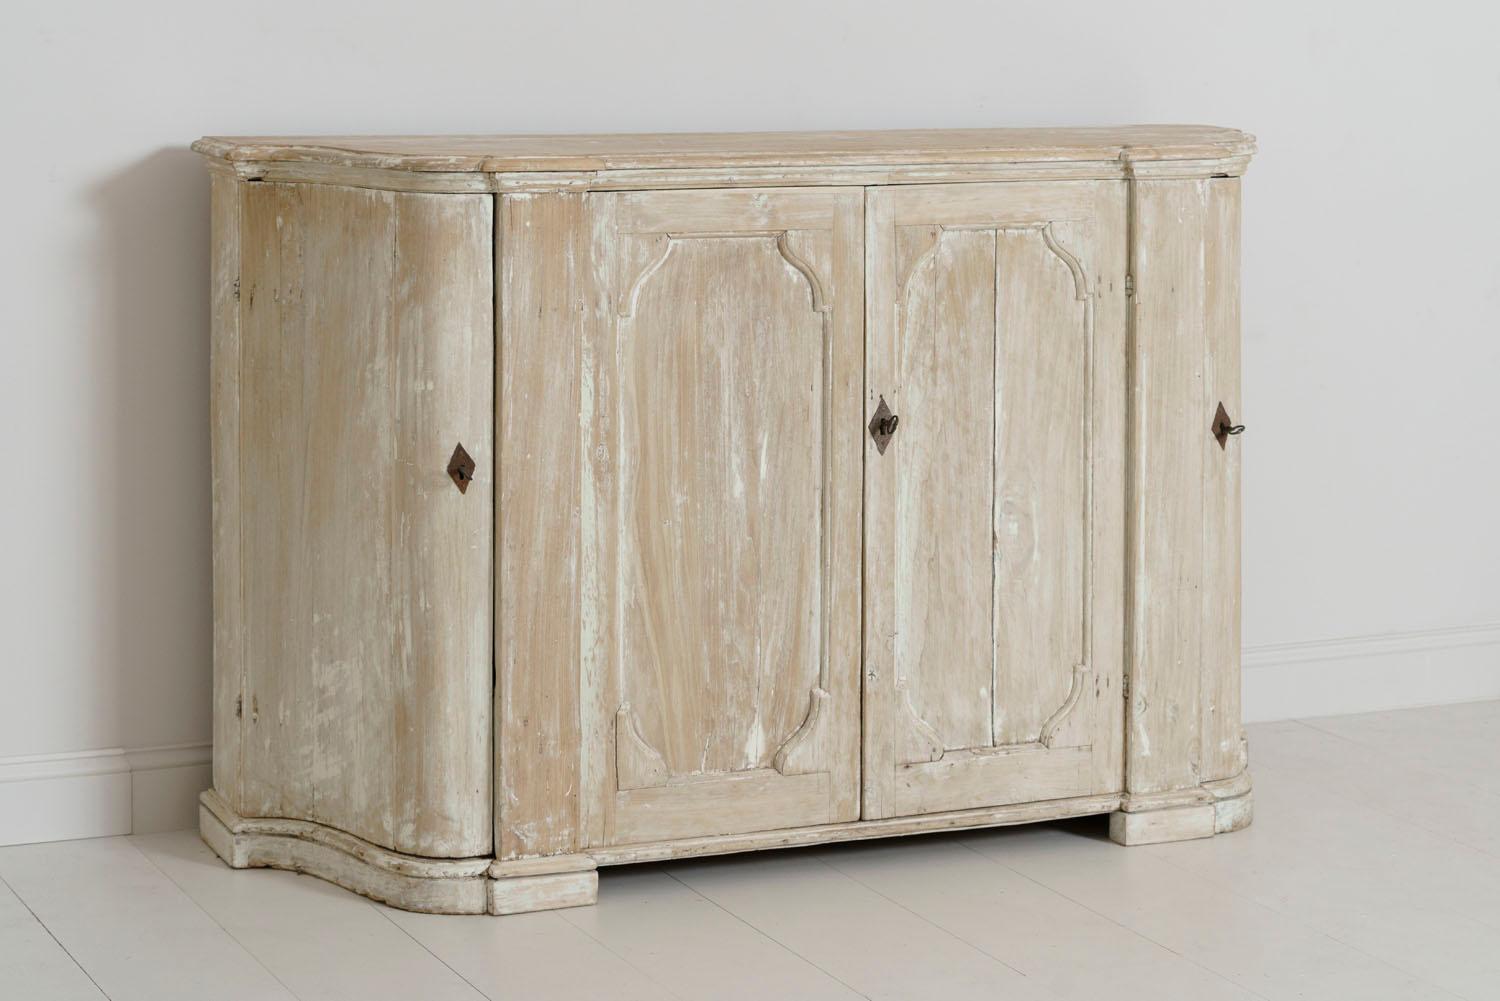 A beautifully refined Italian buffet in original paint with breakfront and serpentine shaped sides from the 18th century. The interior features two shelves in the centre and two shaped shelves on the sides. This is a fabulous transitional piece